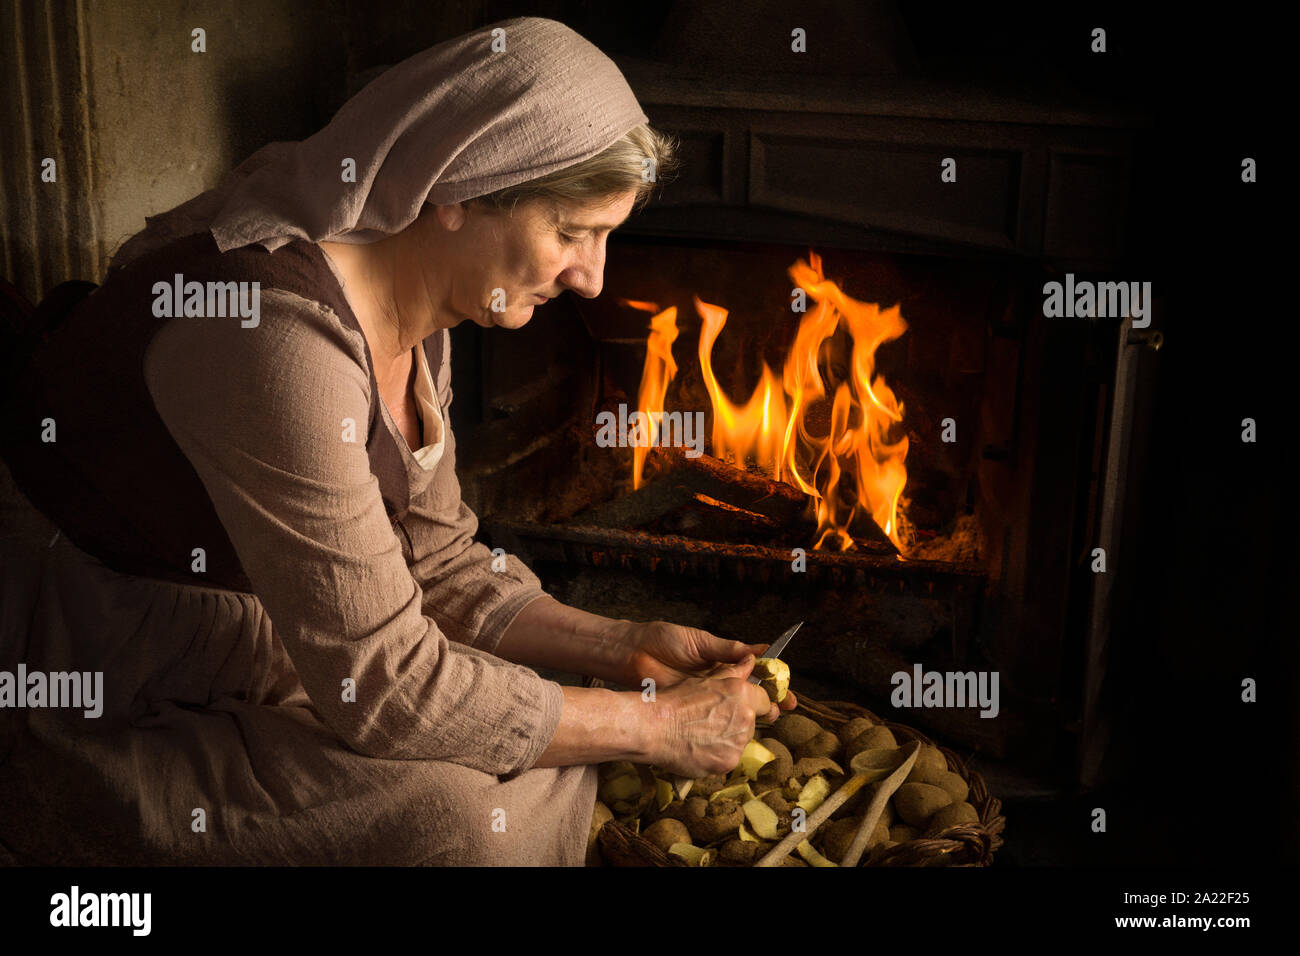 Renaissance old master portrait of a peasant woman peeling potatoes at her fireplace Stock Photo